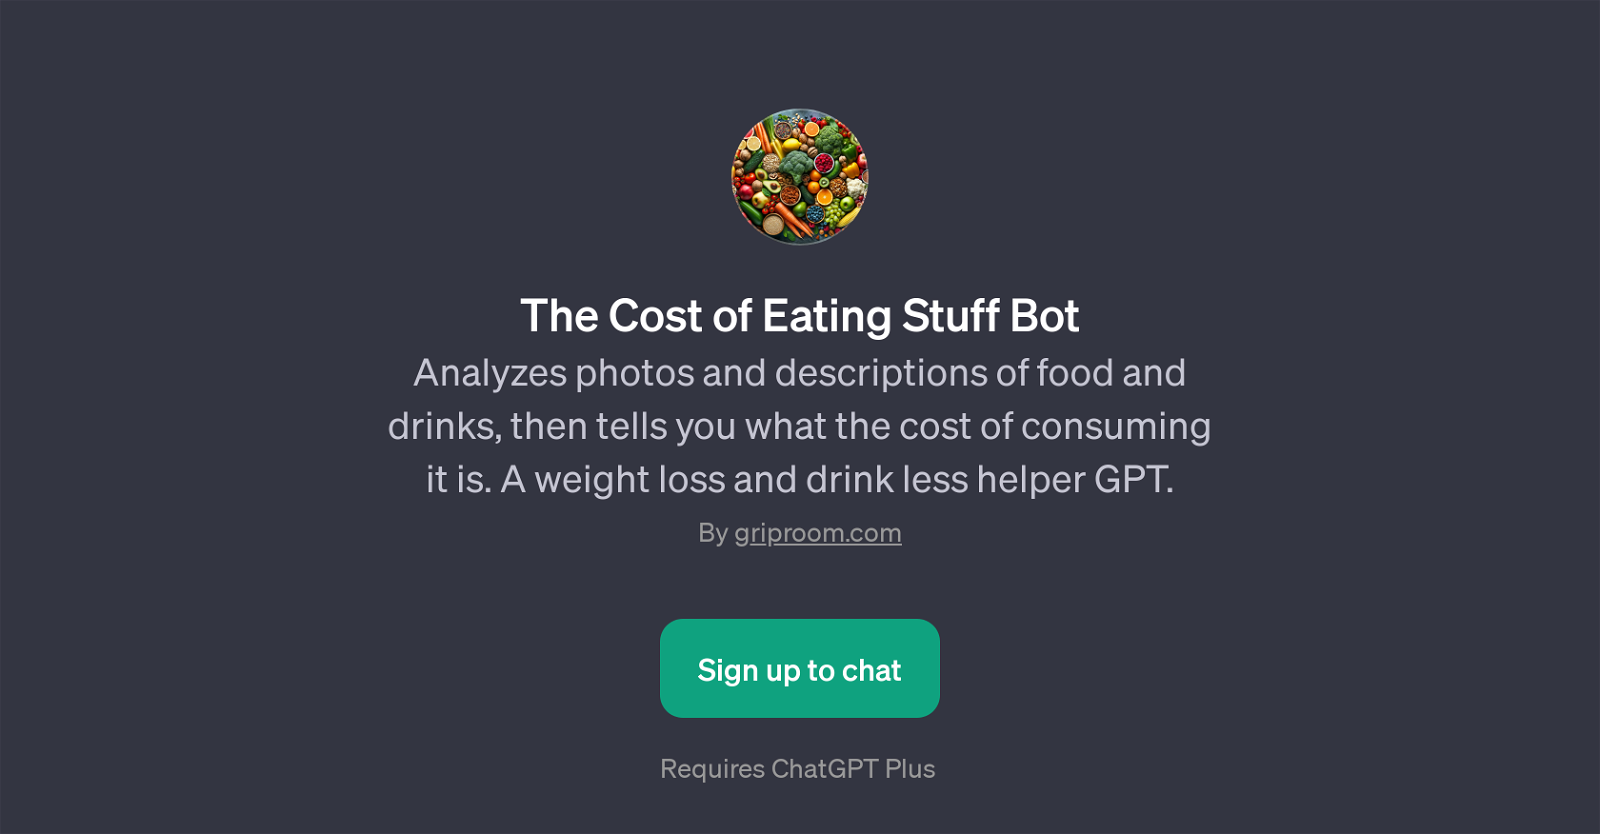 The Cost of Eating Stuff Bot website